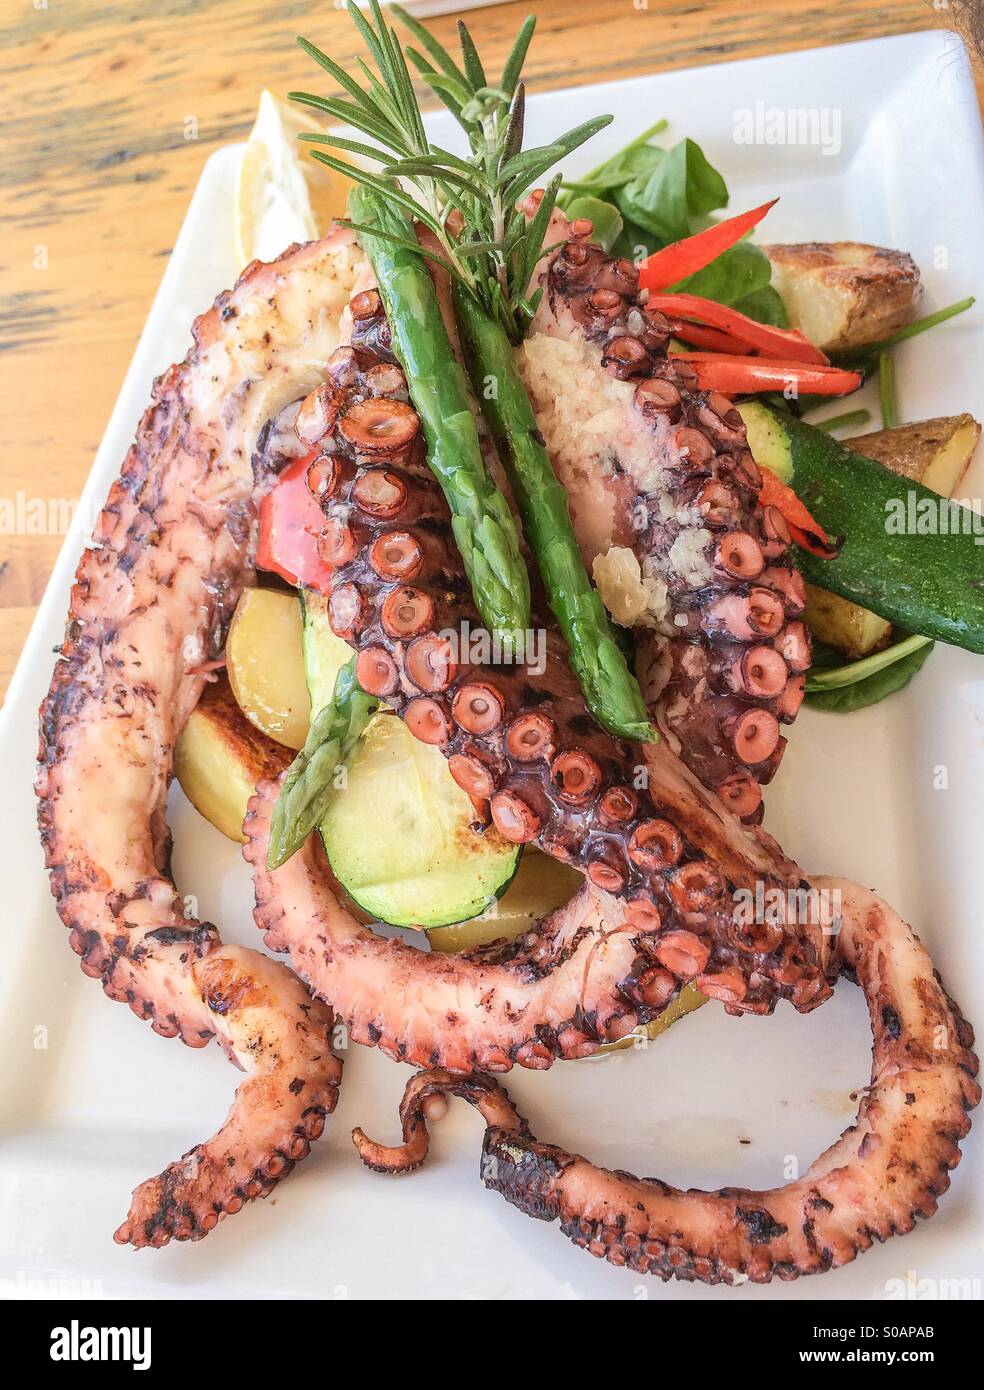 Grilled Octopus Tentacles With Vegetables Mediterranean Cuisine Stock Photo